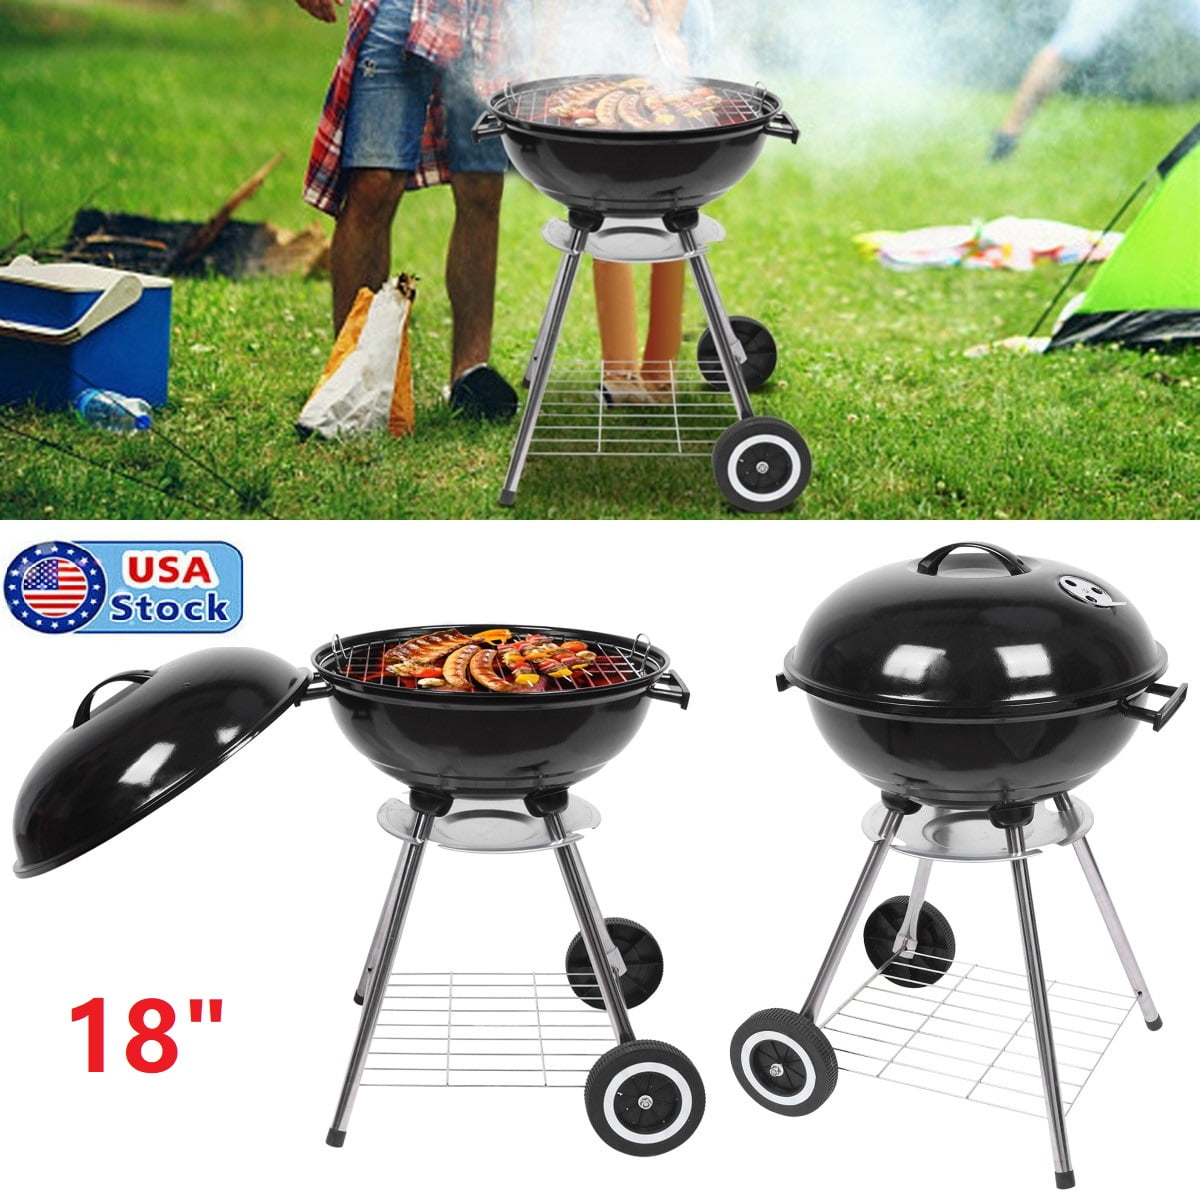 Atotoa 18 Inch Charcoal Bundle Starter,23.6" H Charcoal Grill For Outdoor Camping Cooking Barbecue,Black Walmart.com